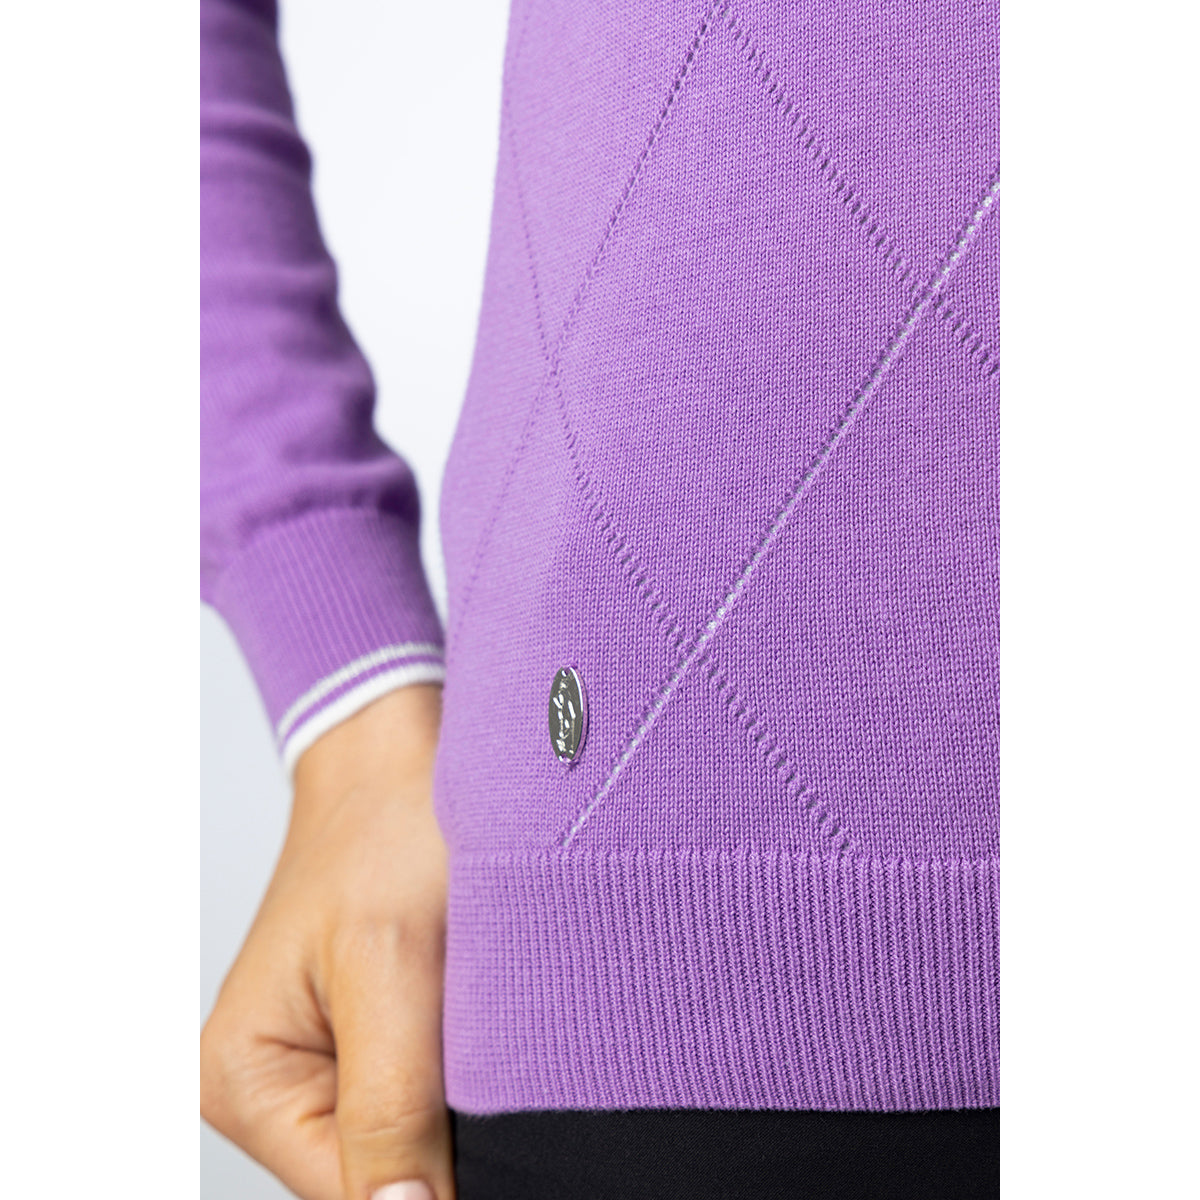 Glenmuir Ladies Long Sleeve Sweater with Pointelle Diamond Design in Amethyst/White/Silver